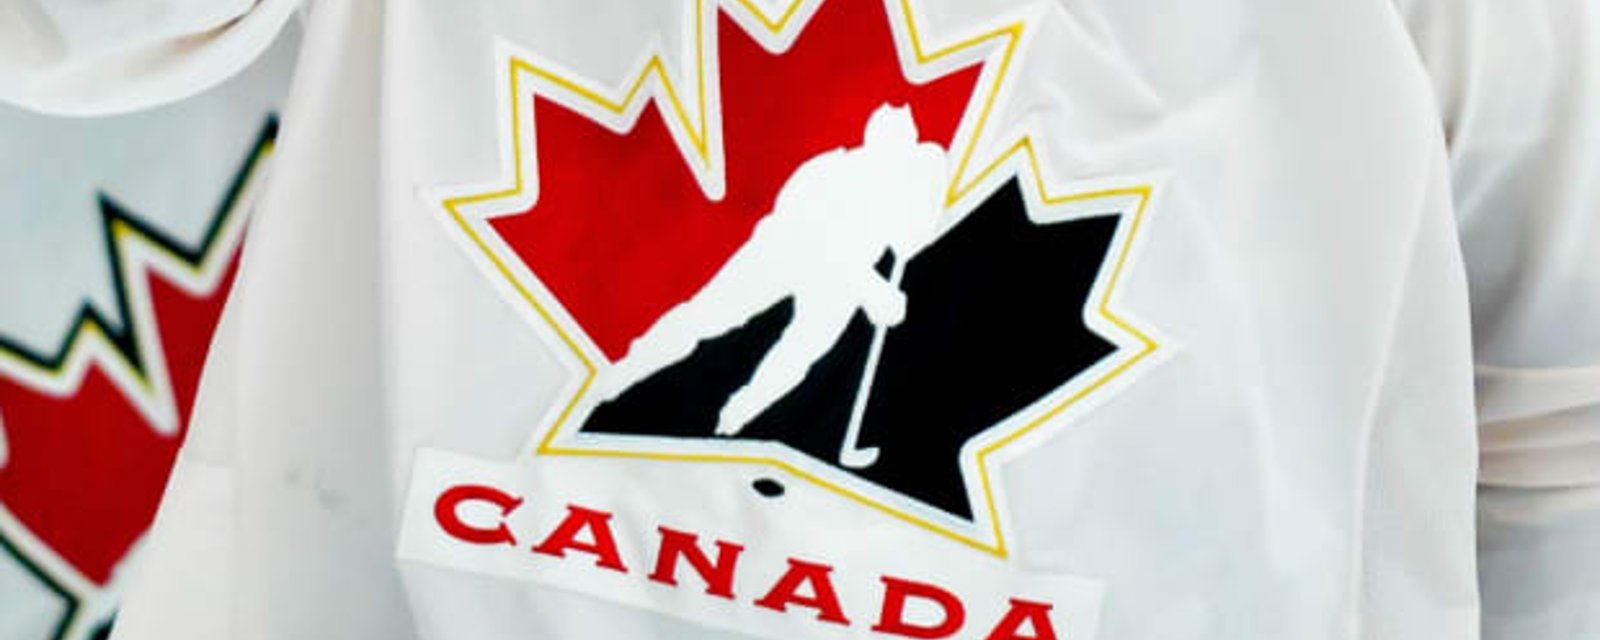 TEAM CANADA: NHL reacts to rumours surrounding 4 players and makes statement on upcoming suspensions